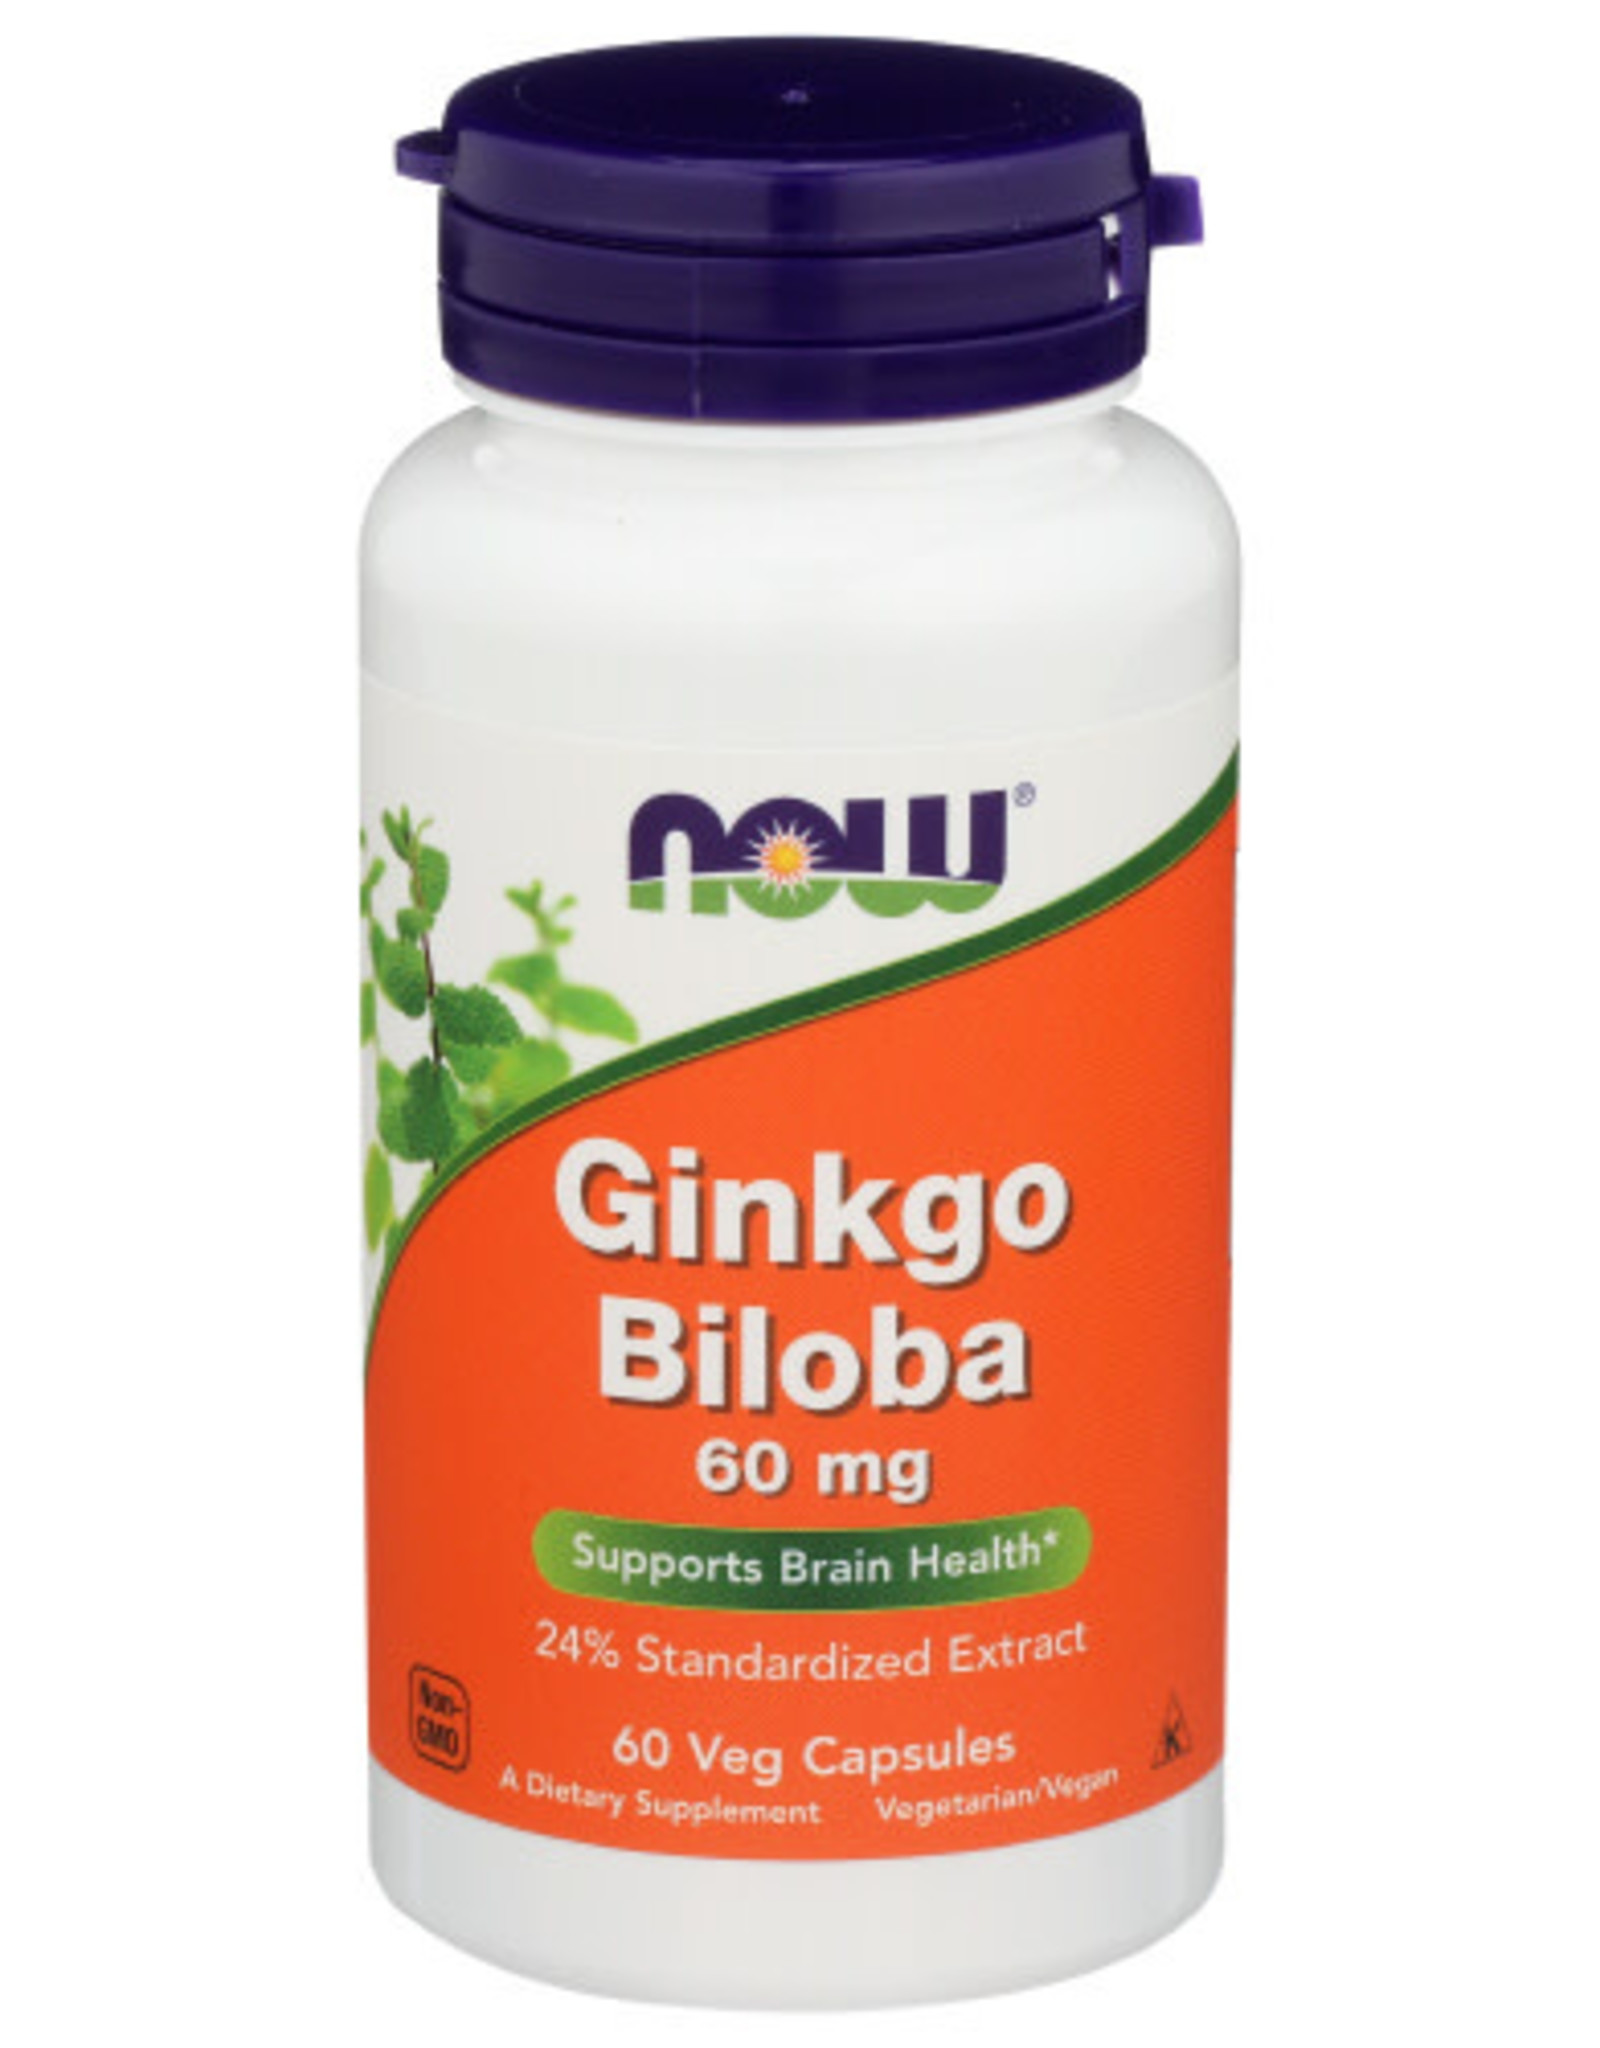 NOW FOODS X Now Ginkgo Biloba 60mg Supports Brain Health 60 Veg Tablets